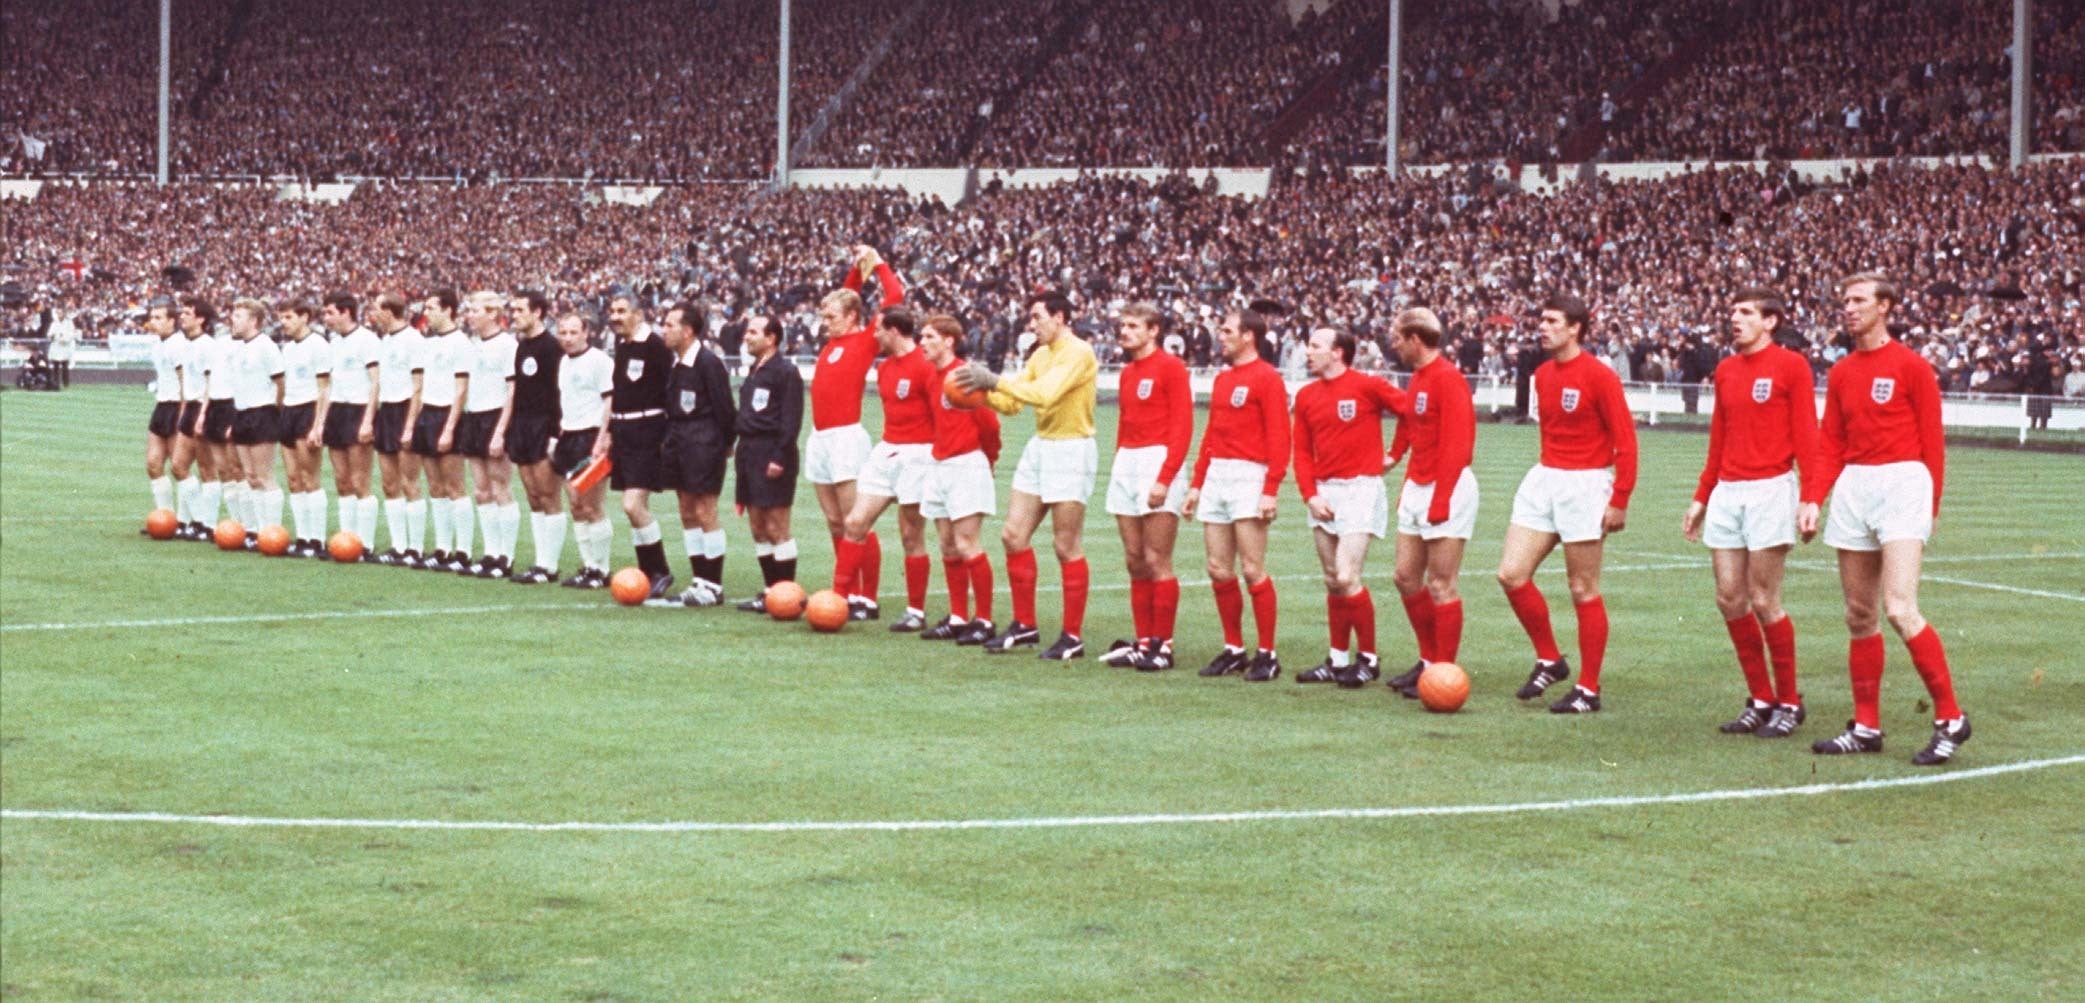 The England and West Germany teams line up on the pitch at Wembley before the 1966 World Cup final (PA)